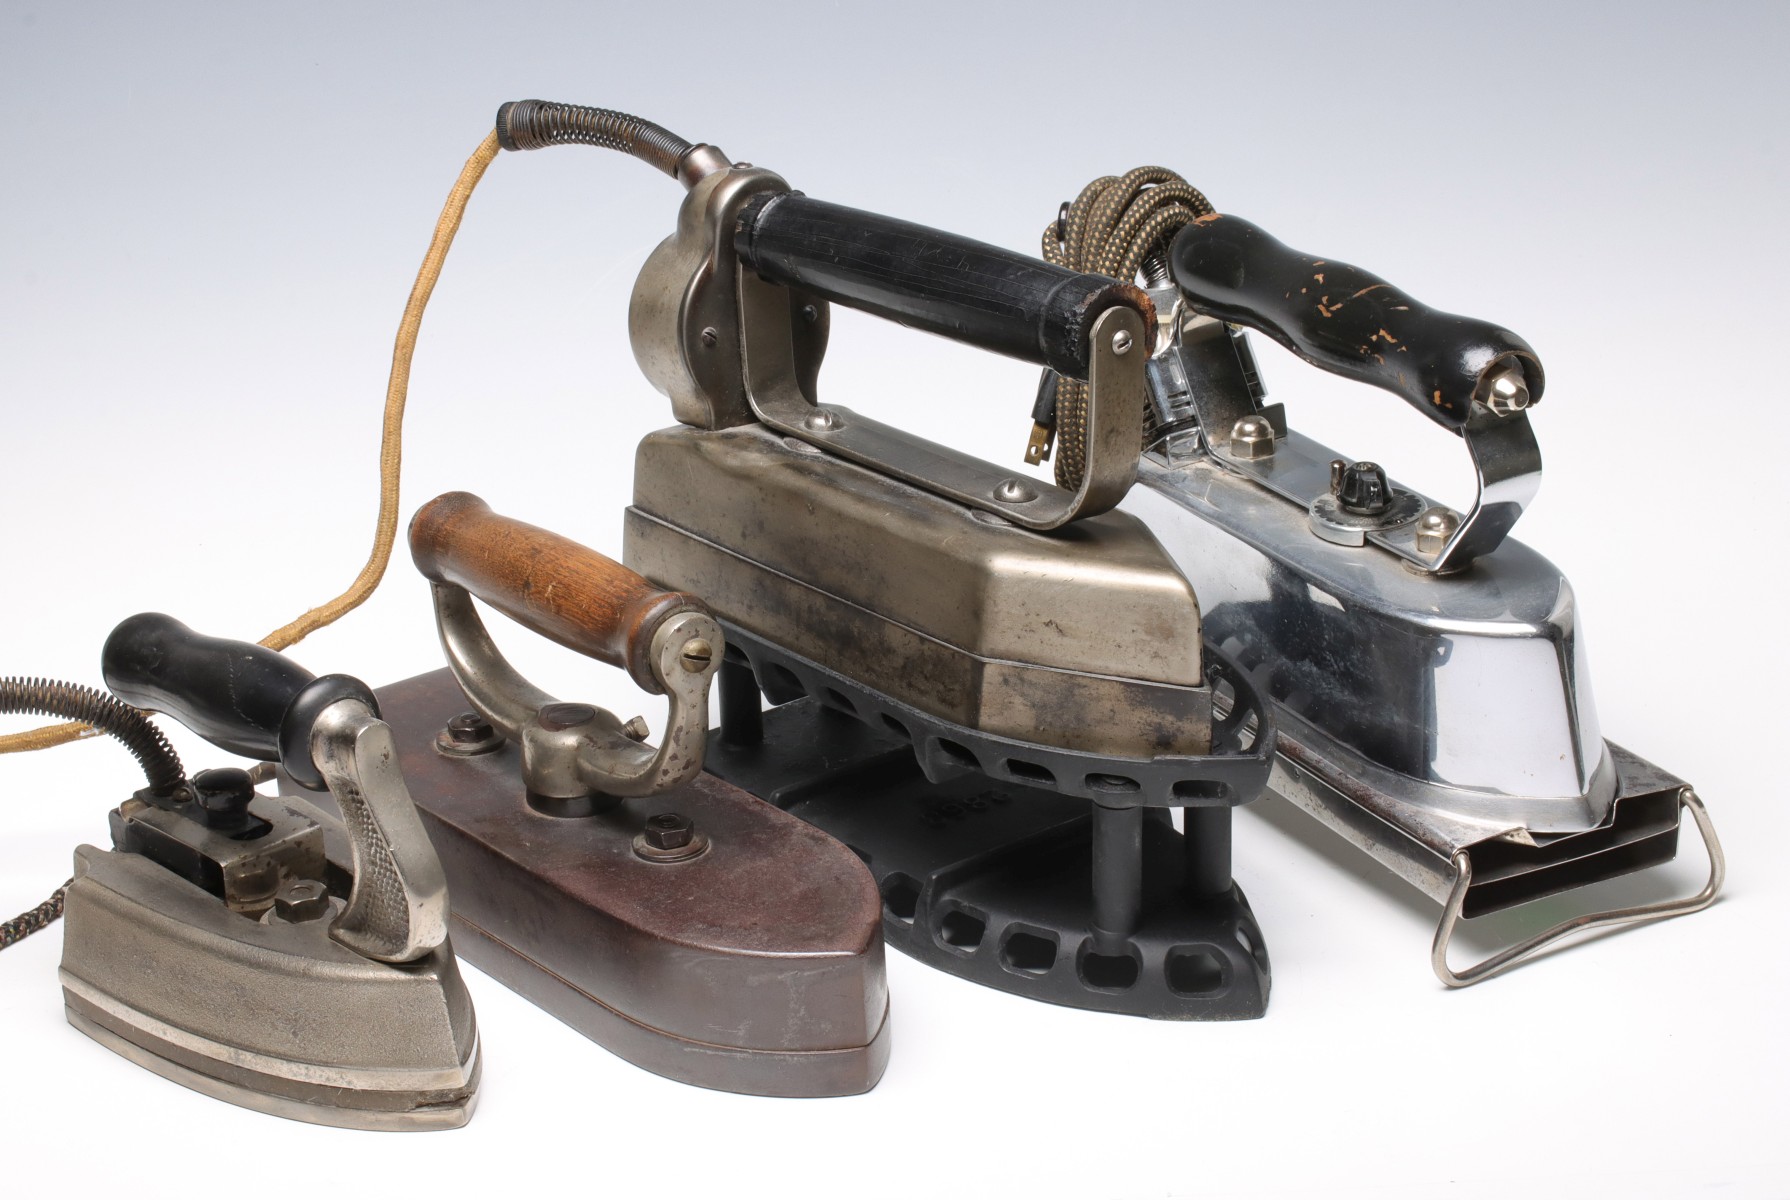 FOUR ELECTRIC IRONS, CIRCA EARLY 20TH CENTURY